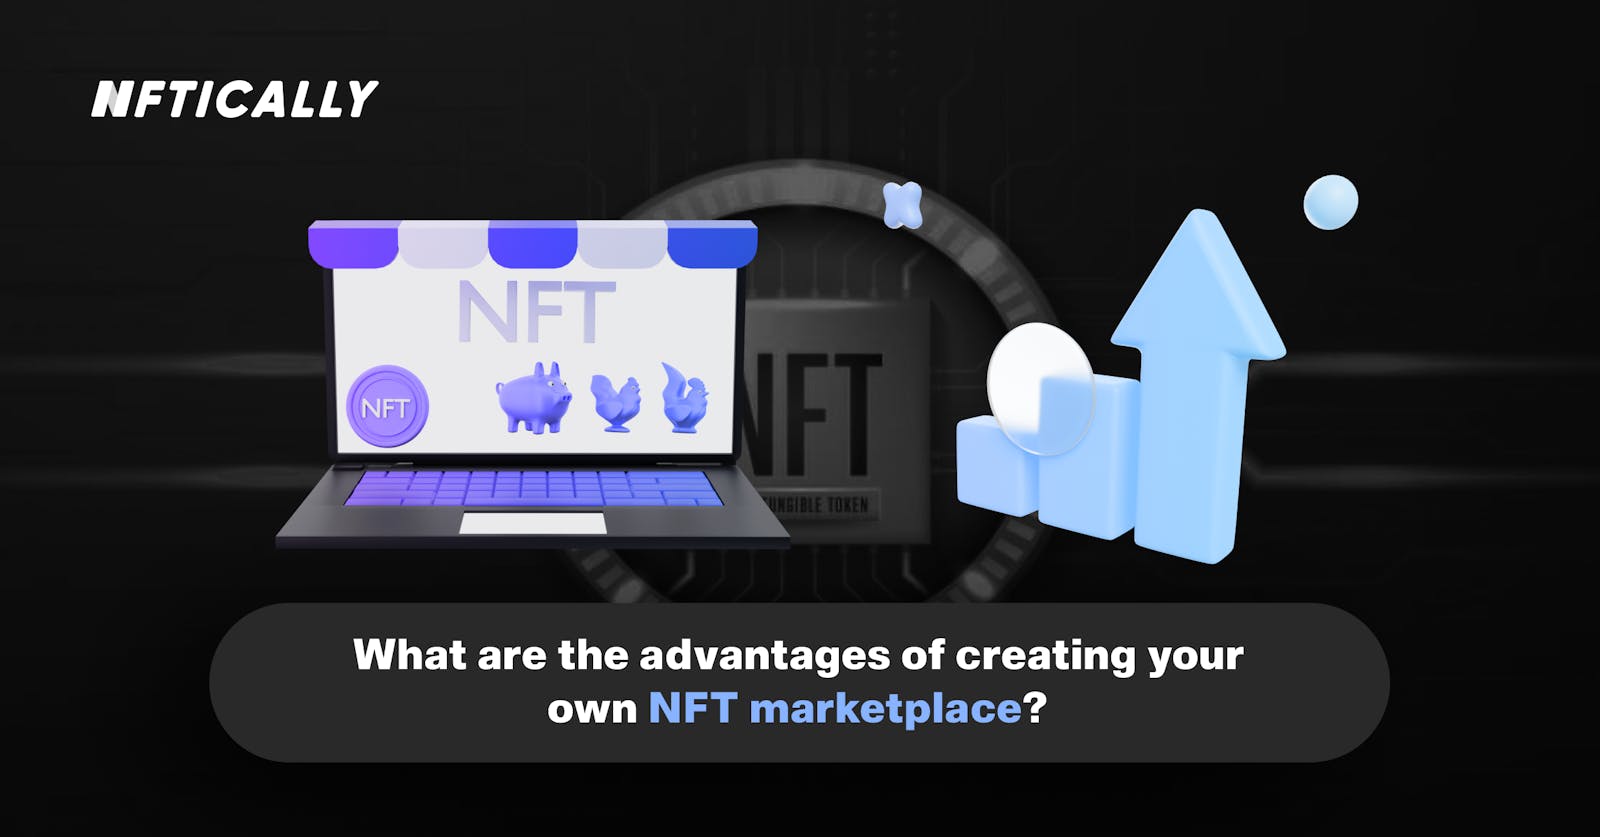 What are the advantages of creating your own NFT marketplace?